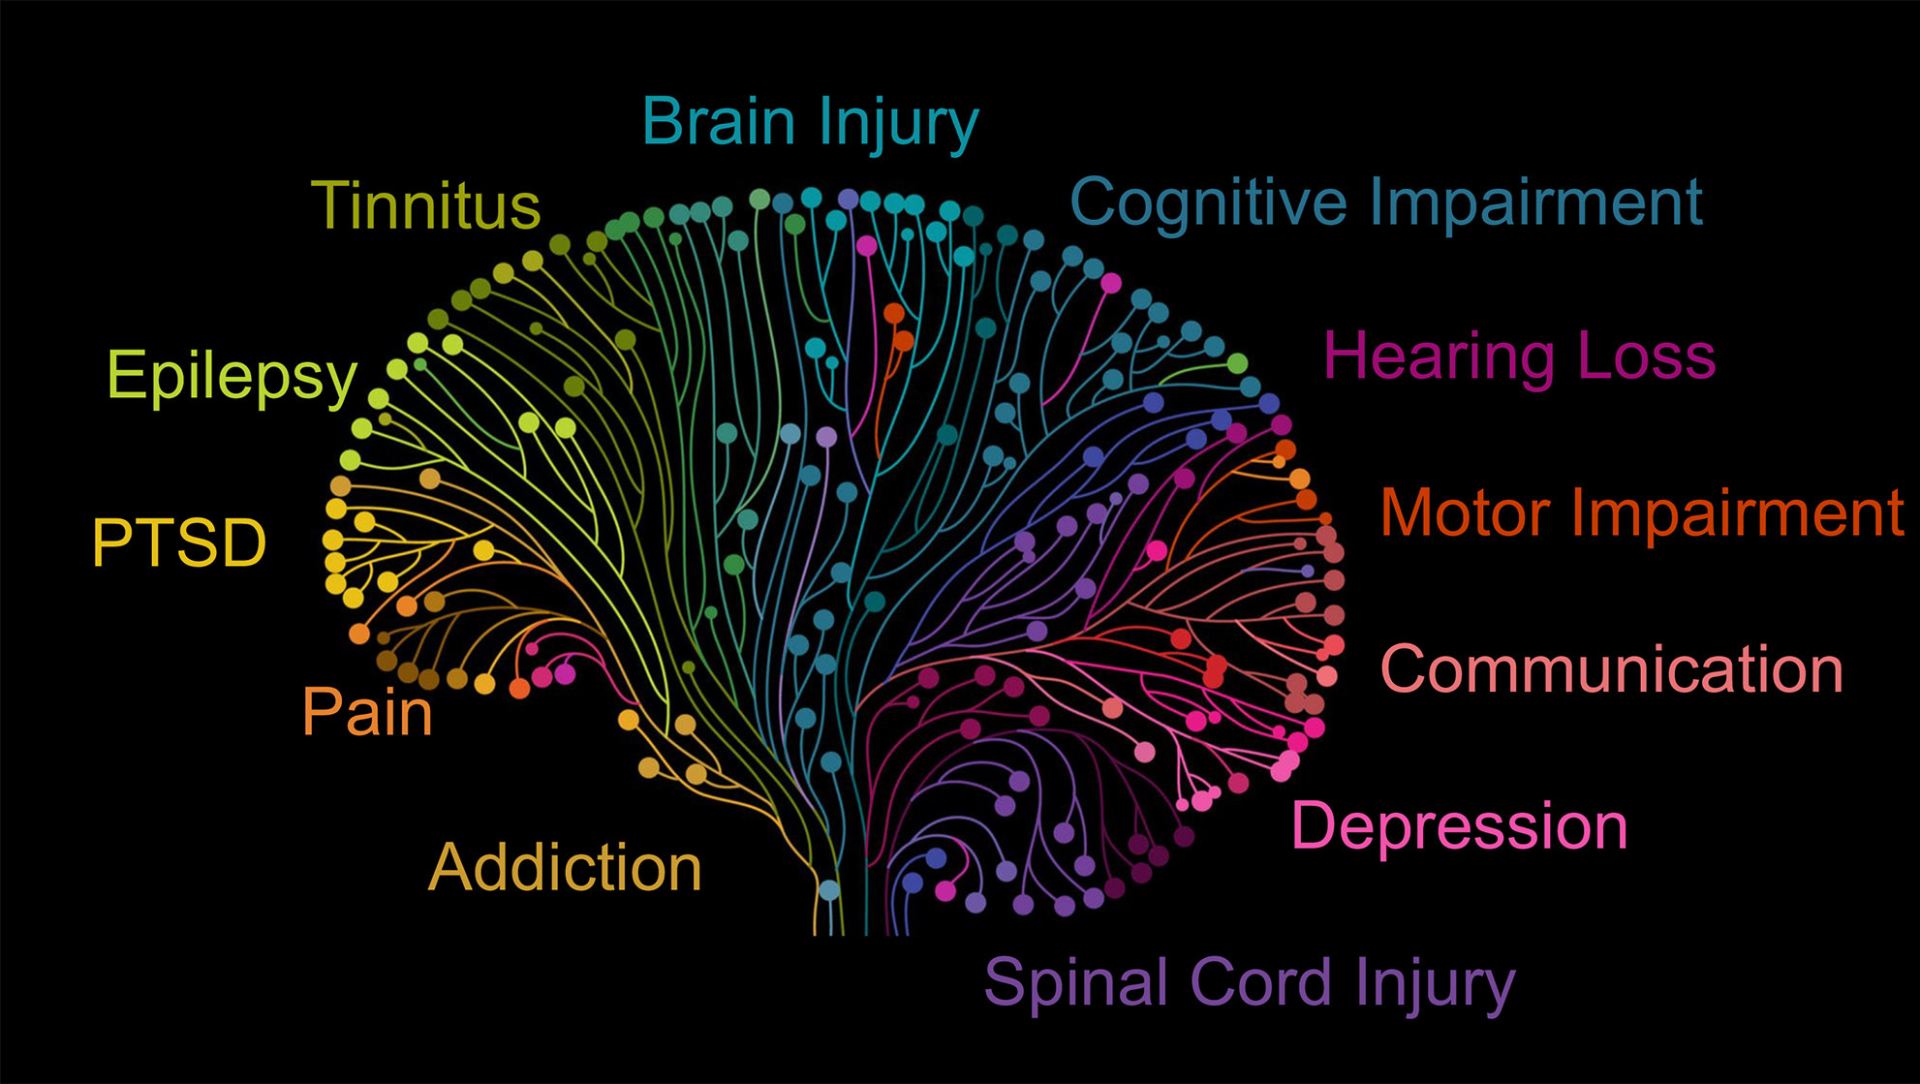 Colorful illustration of a brain with color coding to demonstrate what each part of the brain controls.